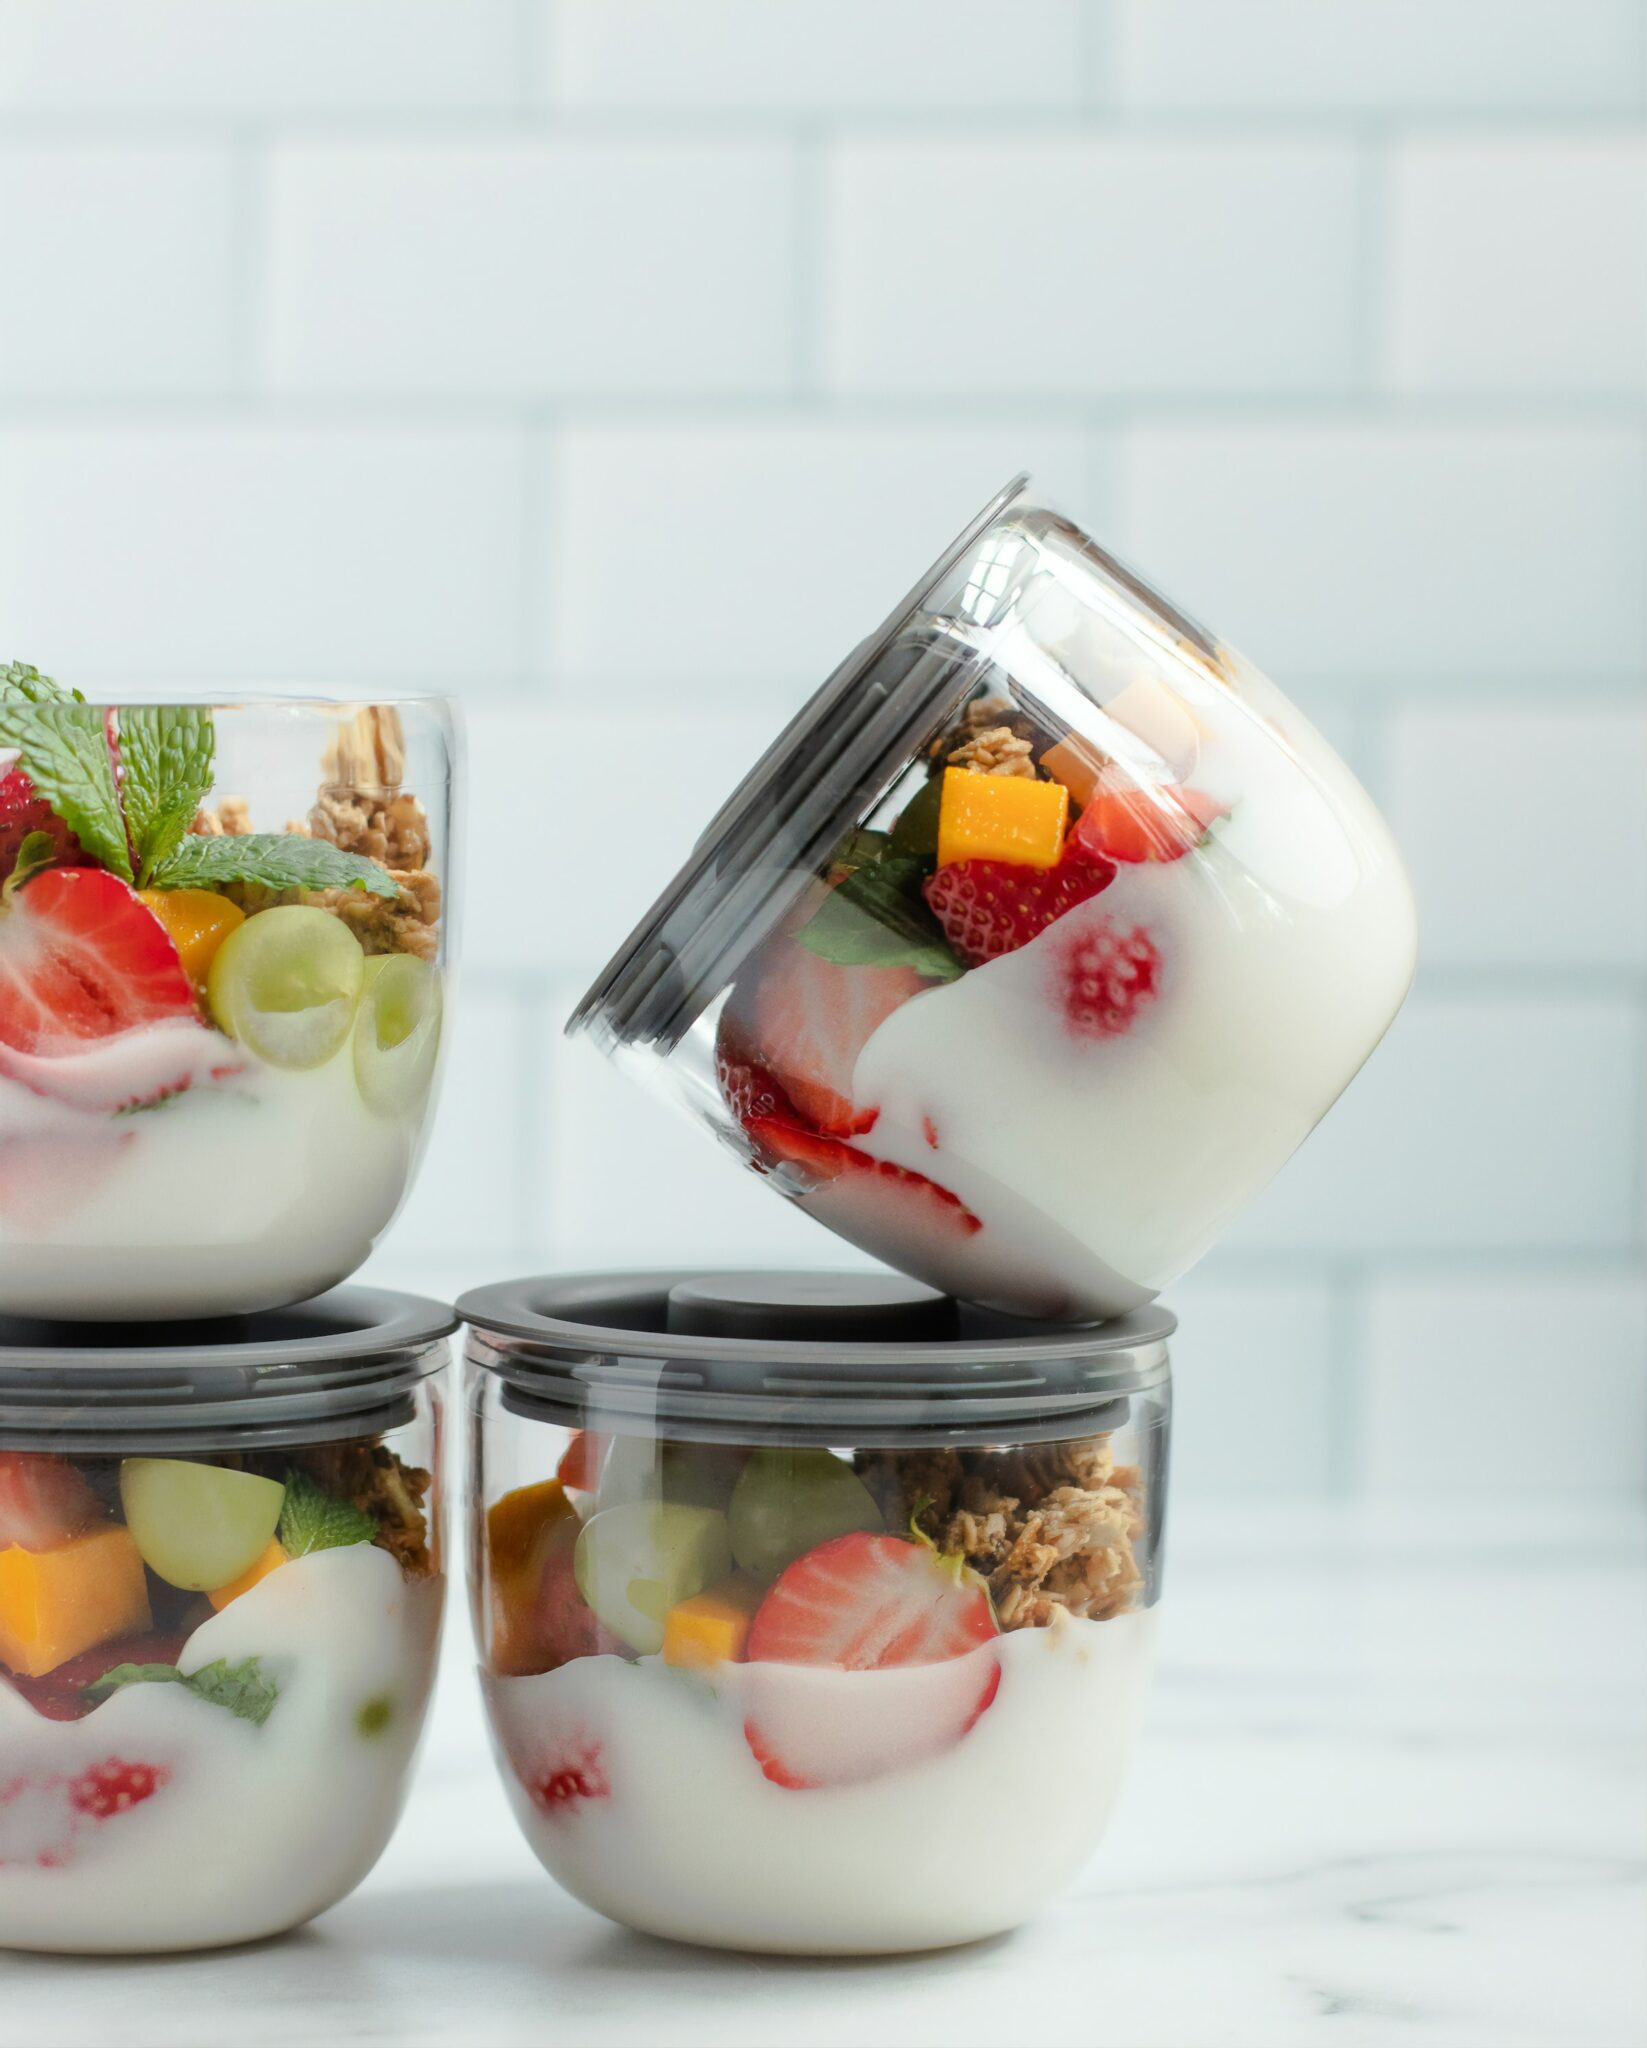 Containers of yogurt and fruit